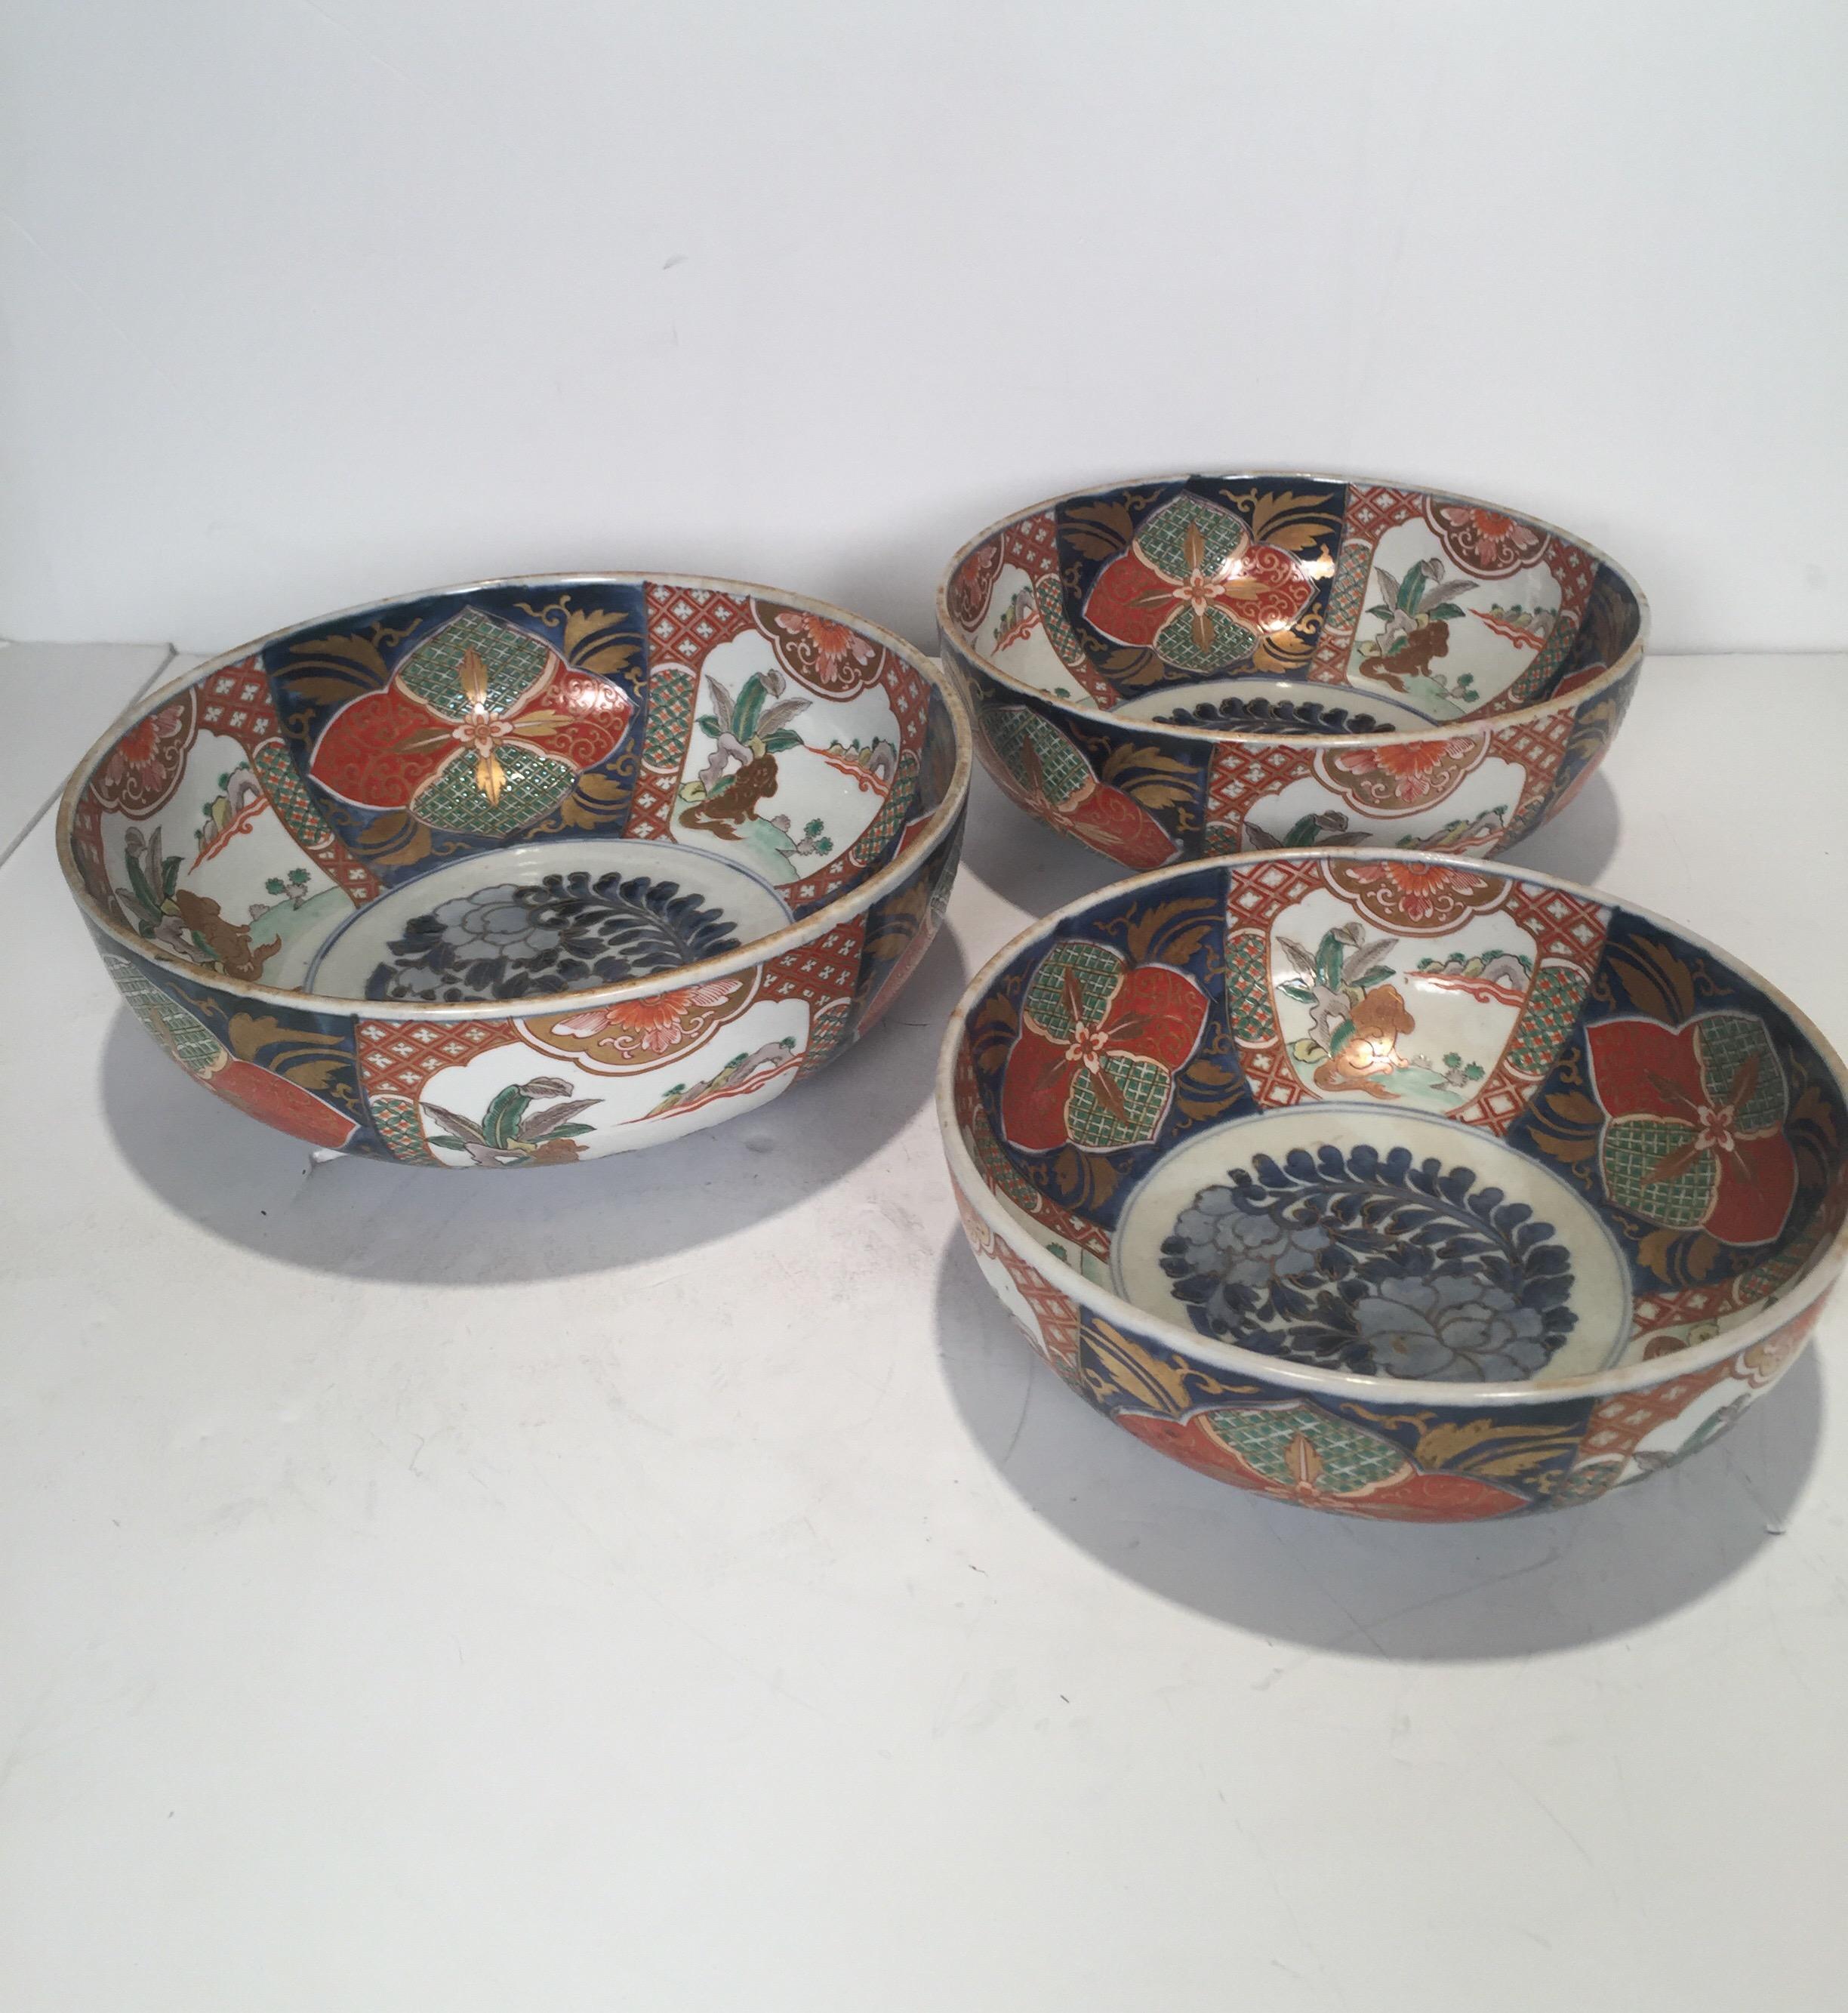 A rare set of three hand painted Imari porcelain graduated sized bowls with the same hand painted scenes and decoration on each. The large is 12 inches in diameter, with the medium 11 inches and the smallest 10 inches. Meiji period, circa 1880s.